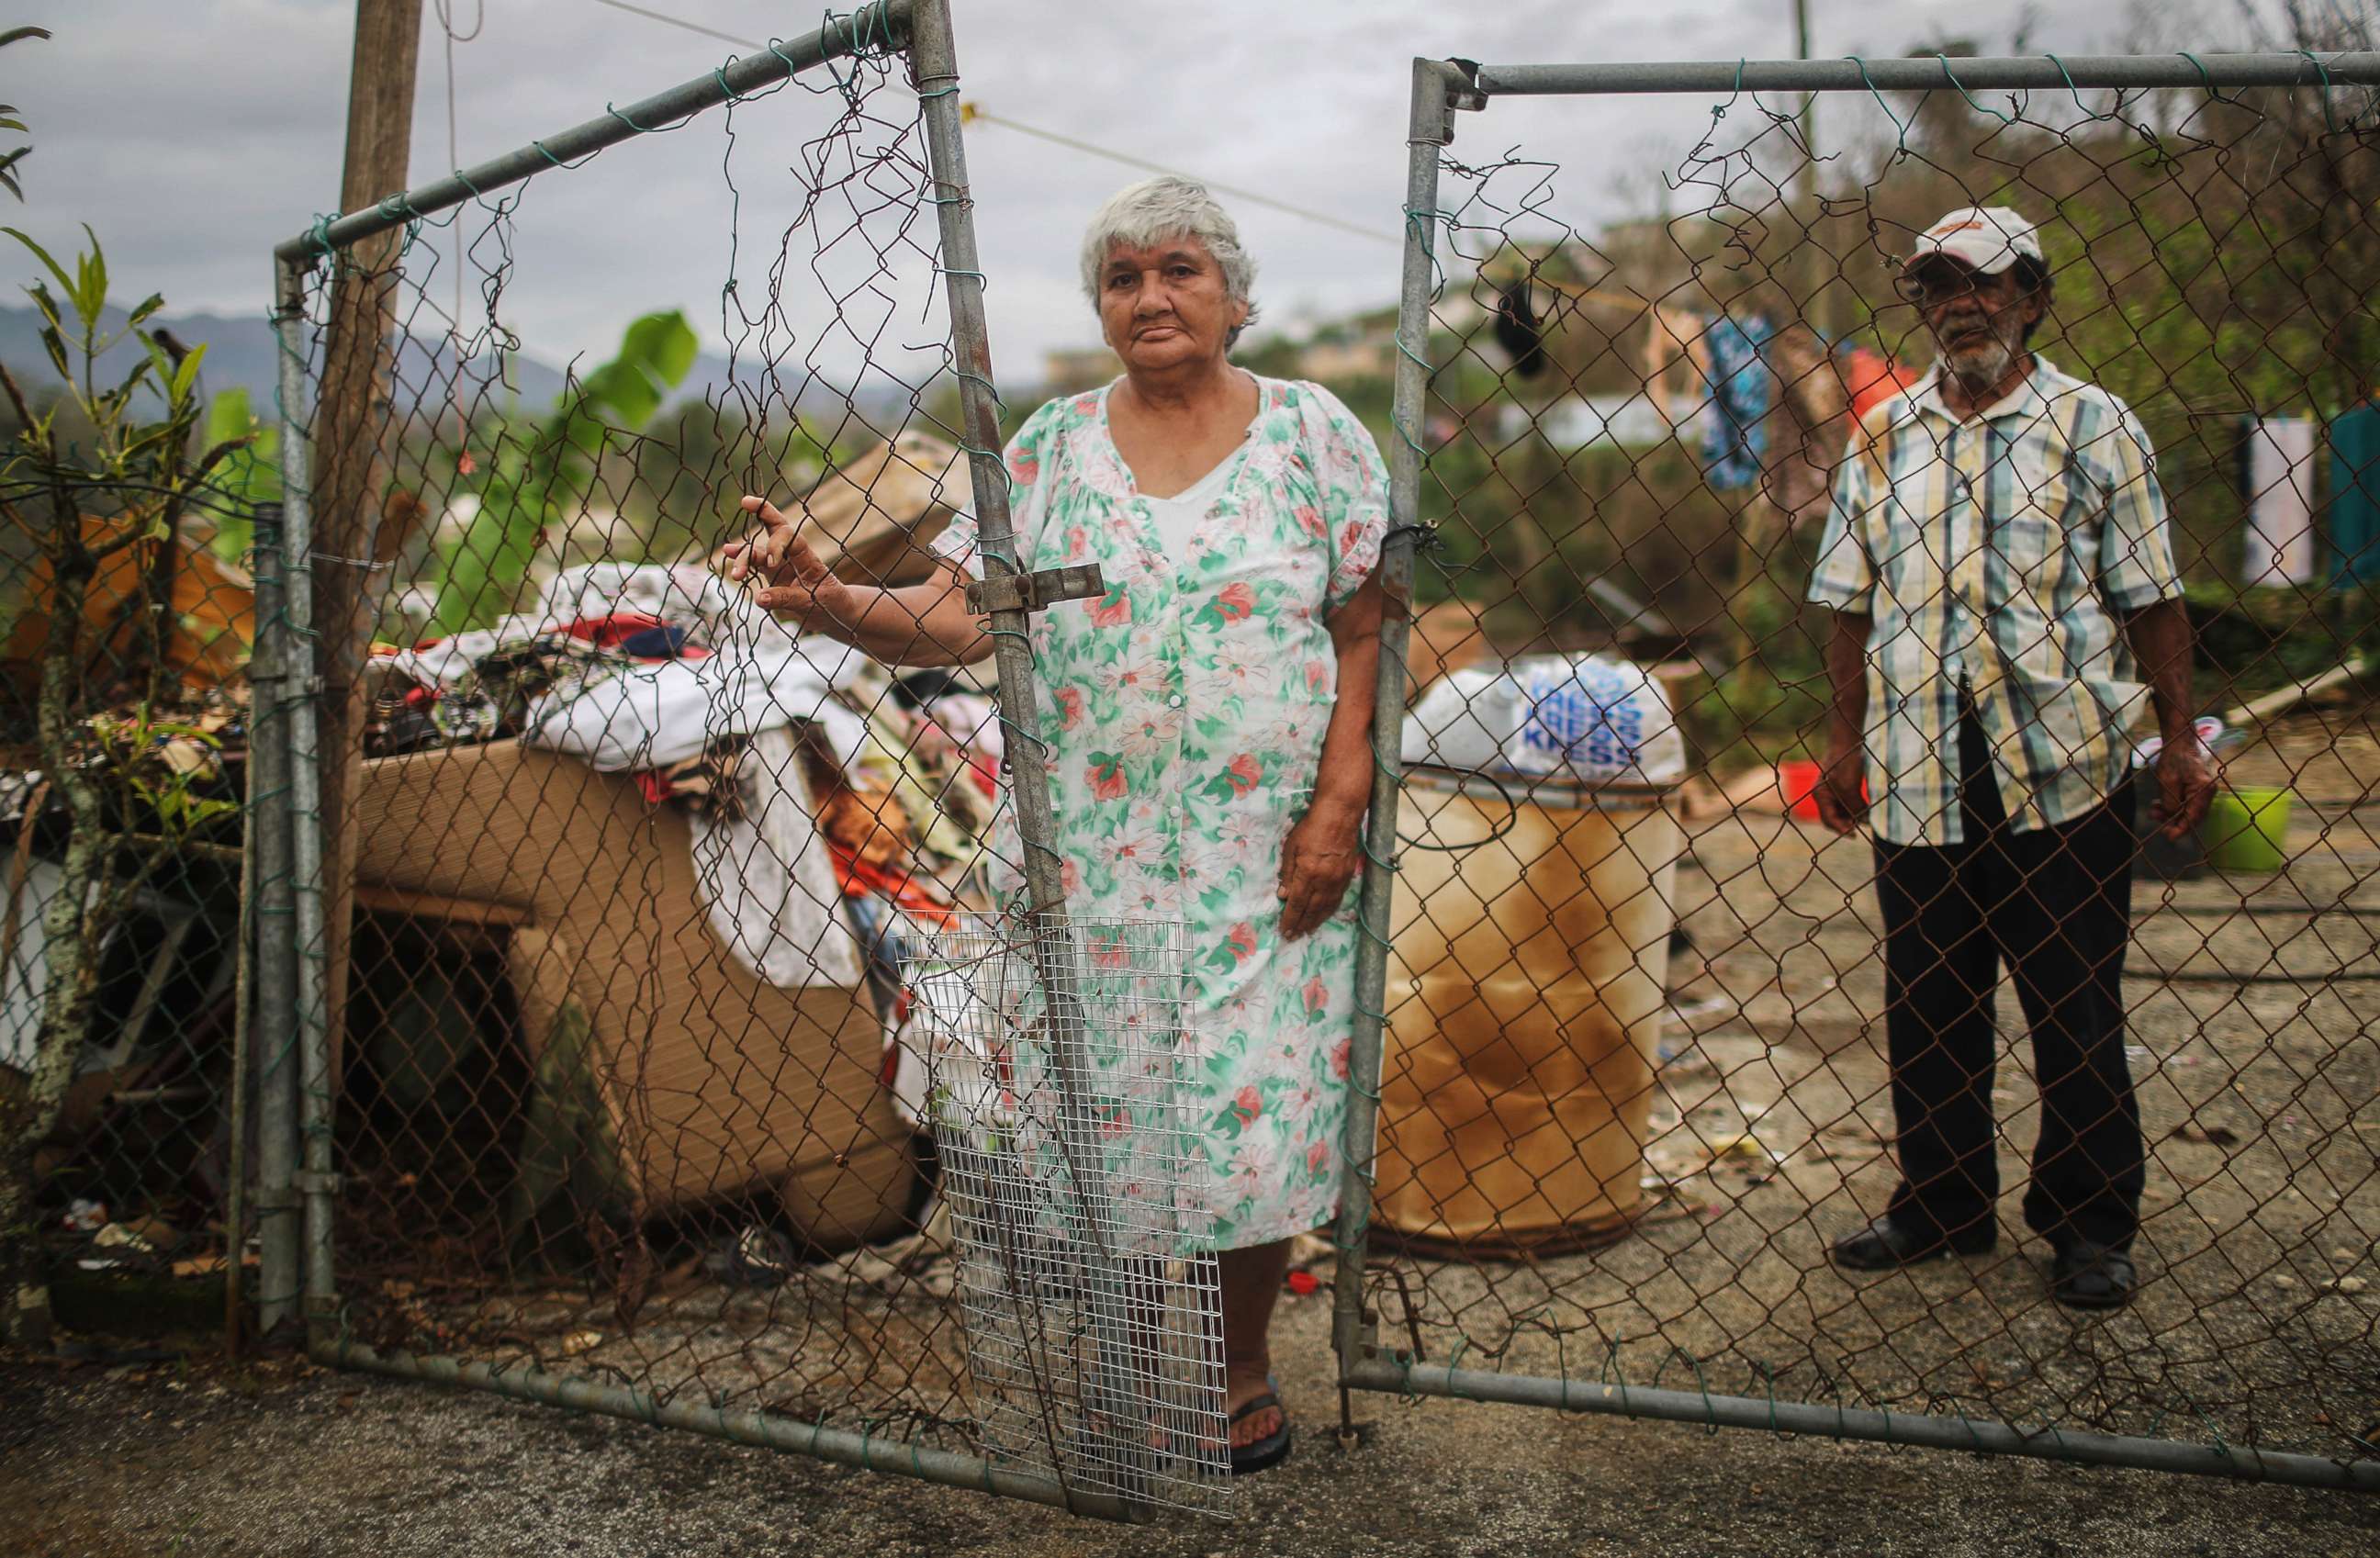 PHOTO: Luz Sota Rivera (C) and Francisco Nazario Aviles pose outside their damaged home, with debris removed from their home uncollected in the driveway, three weeks after Hurricane Maria hit the island, Oct. 12, 2017 in Jayuya, Puerto Rico. 